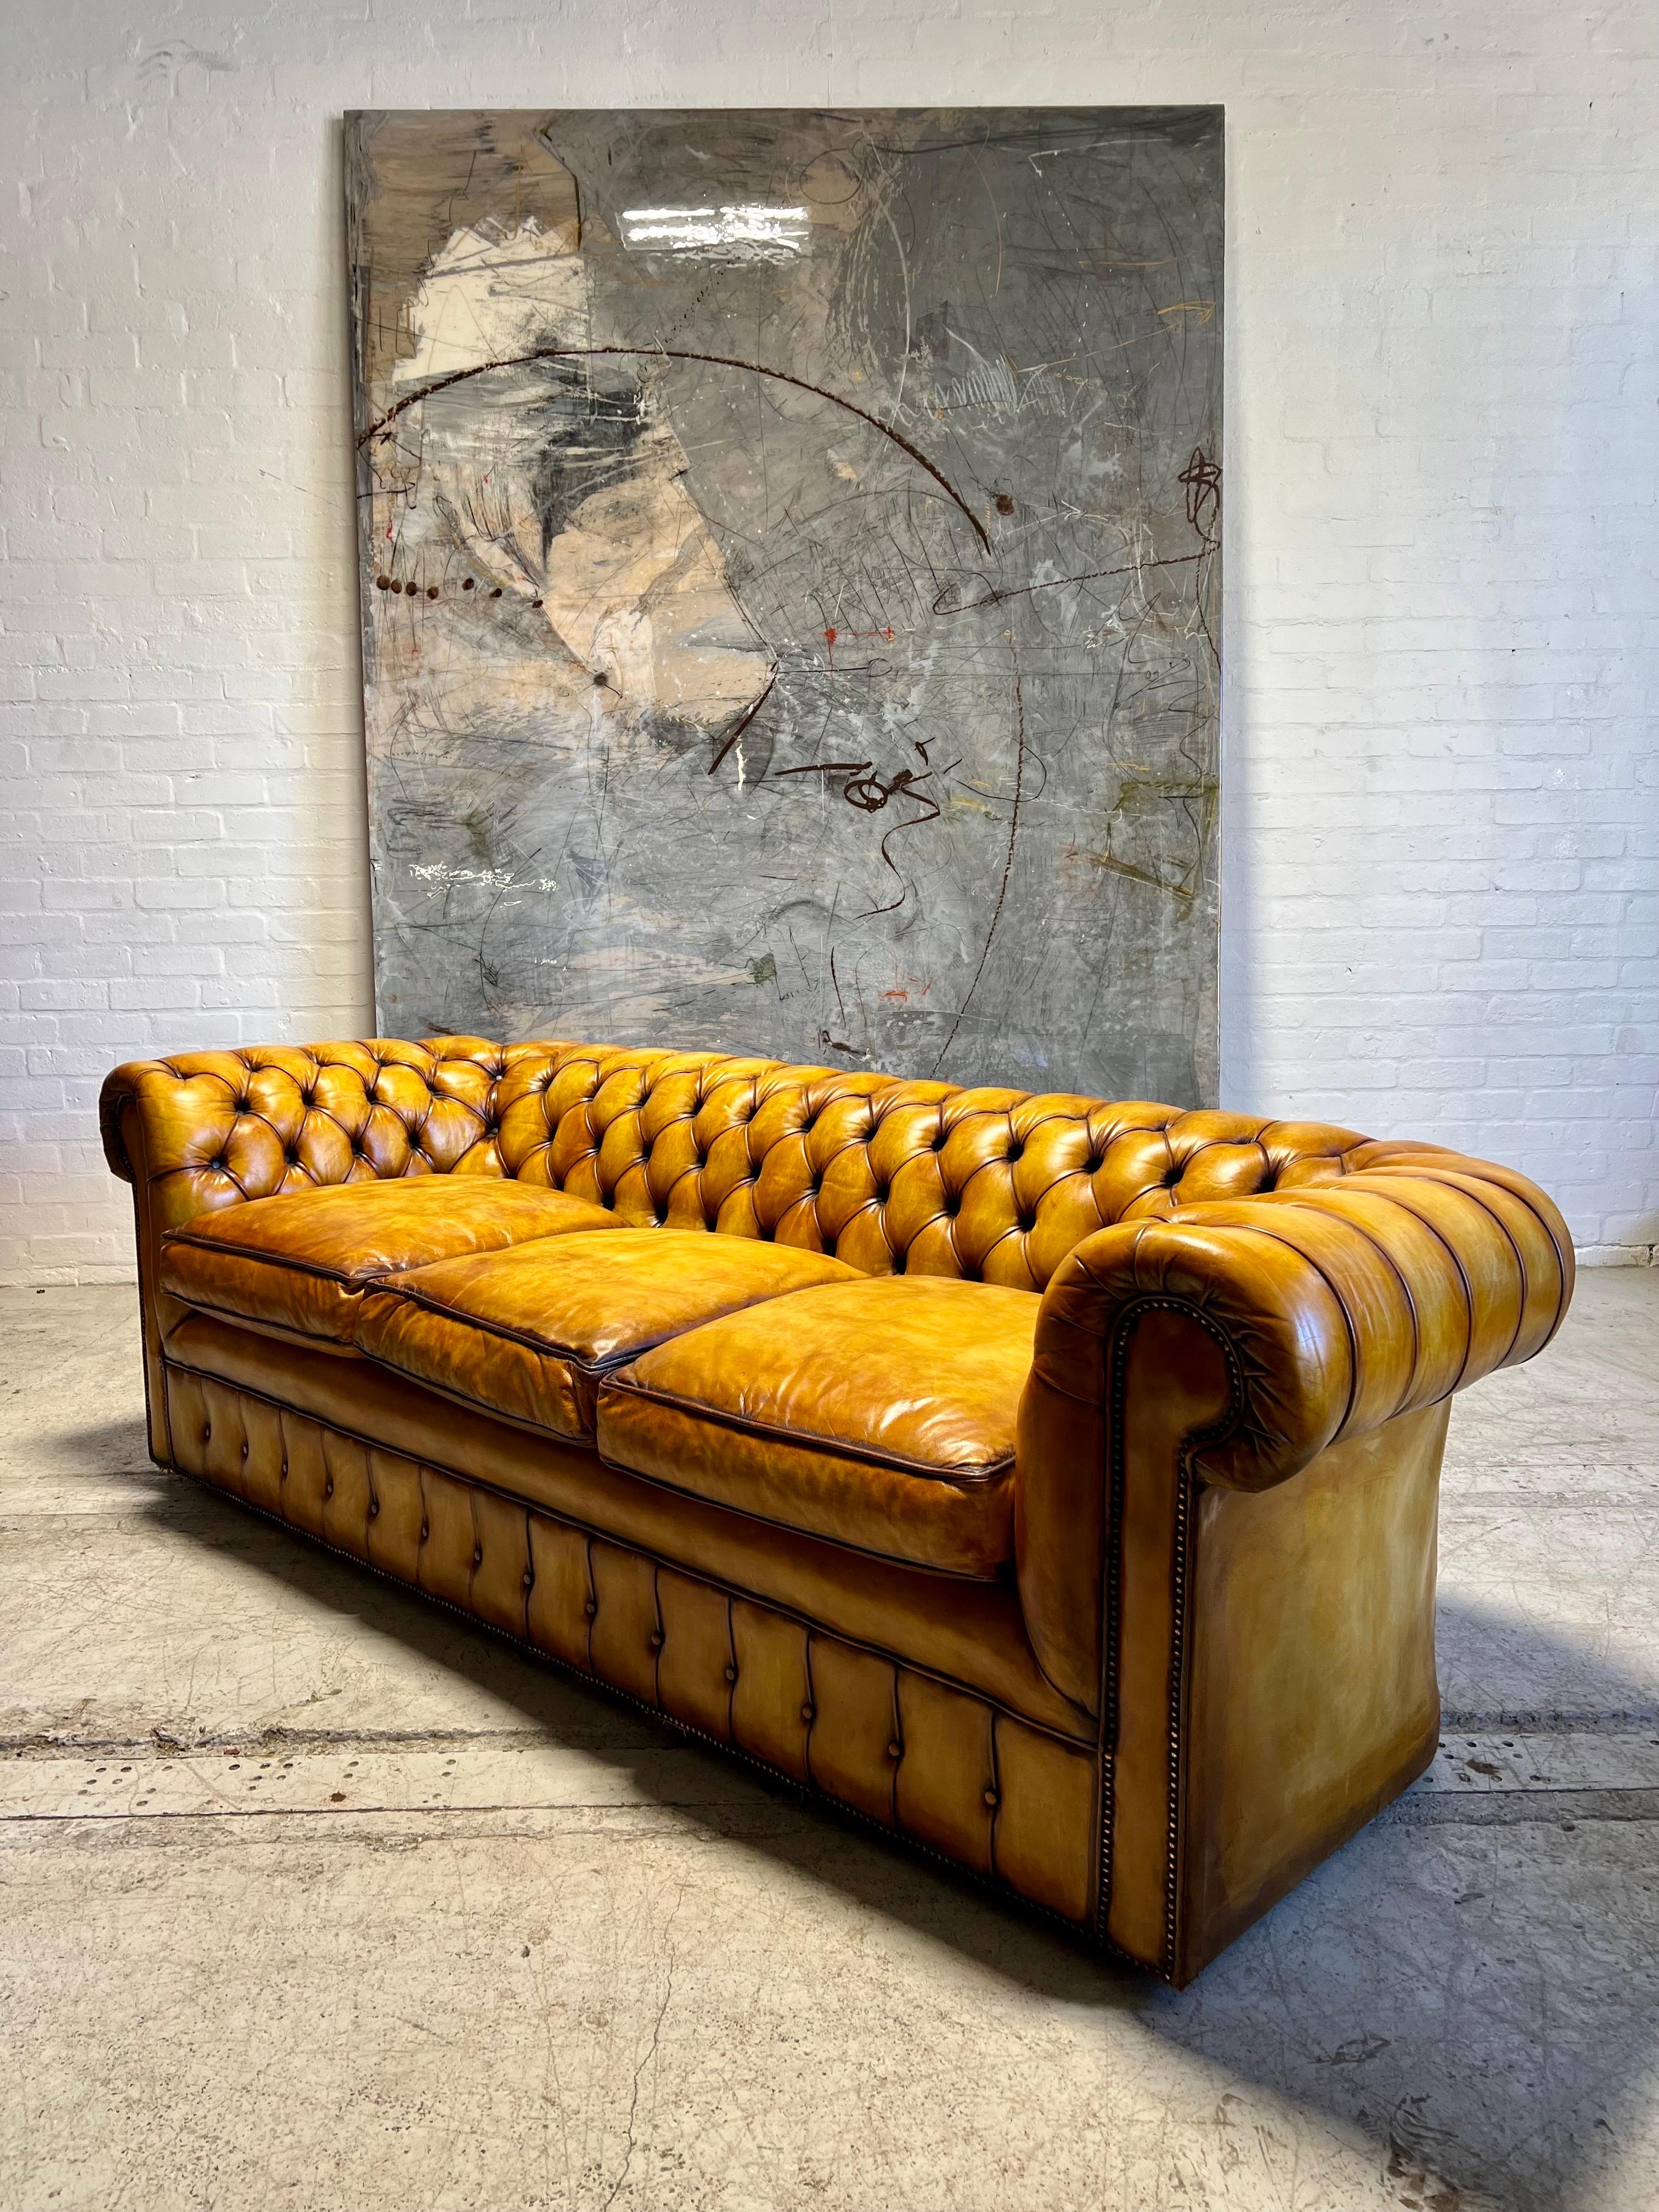 20th Century Beautiful Mid-C Leather Chesterfield Sofa in Hand Dyed Golden Tans For Sale